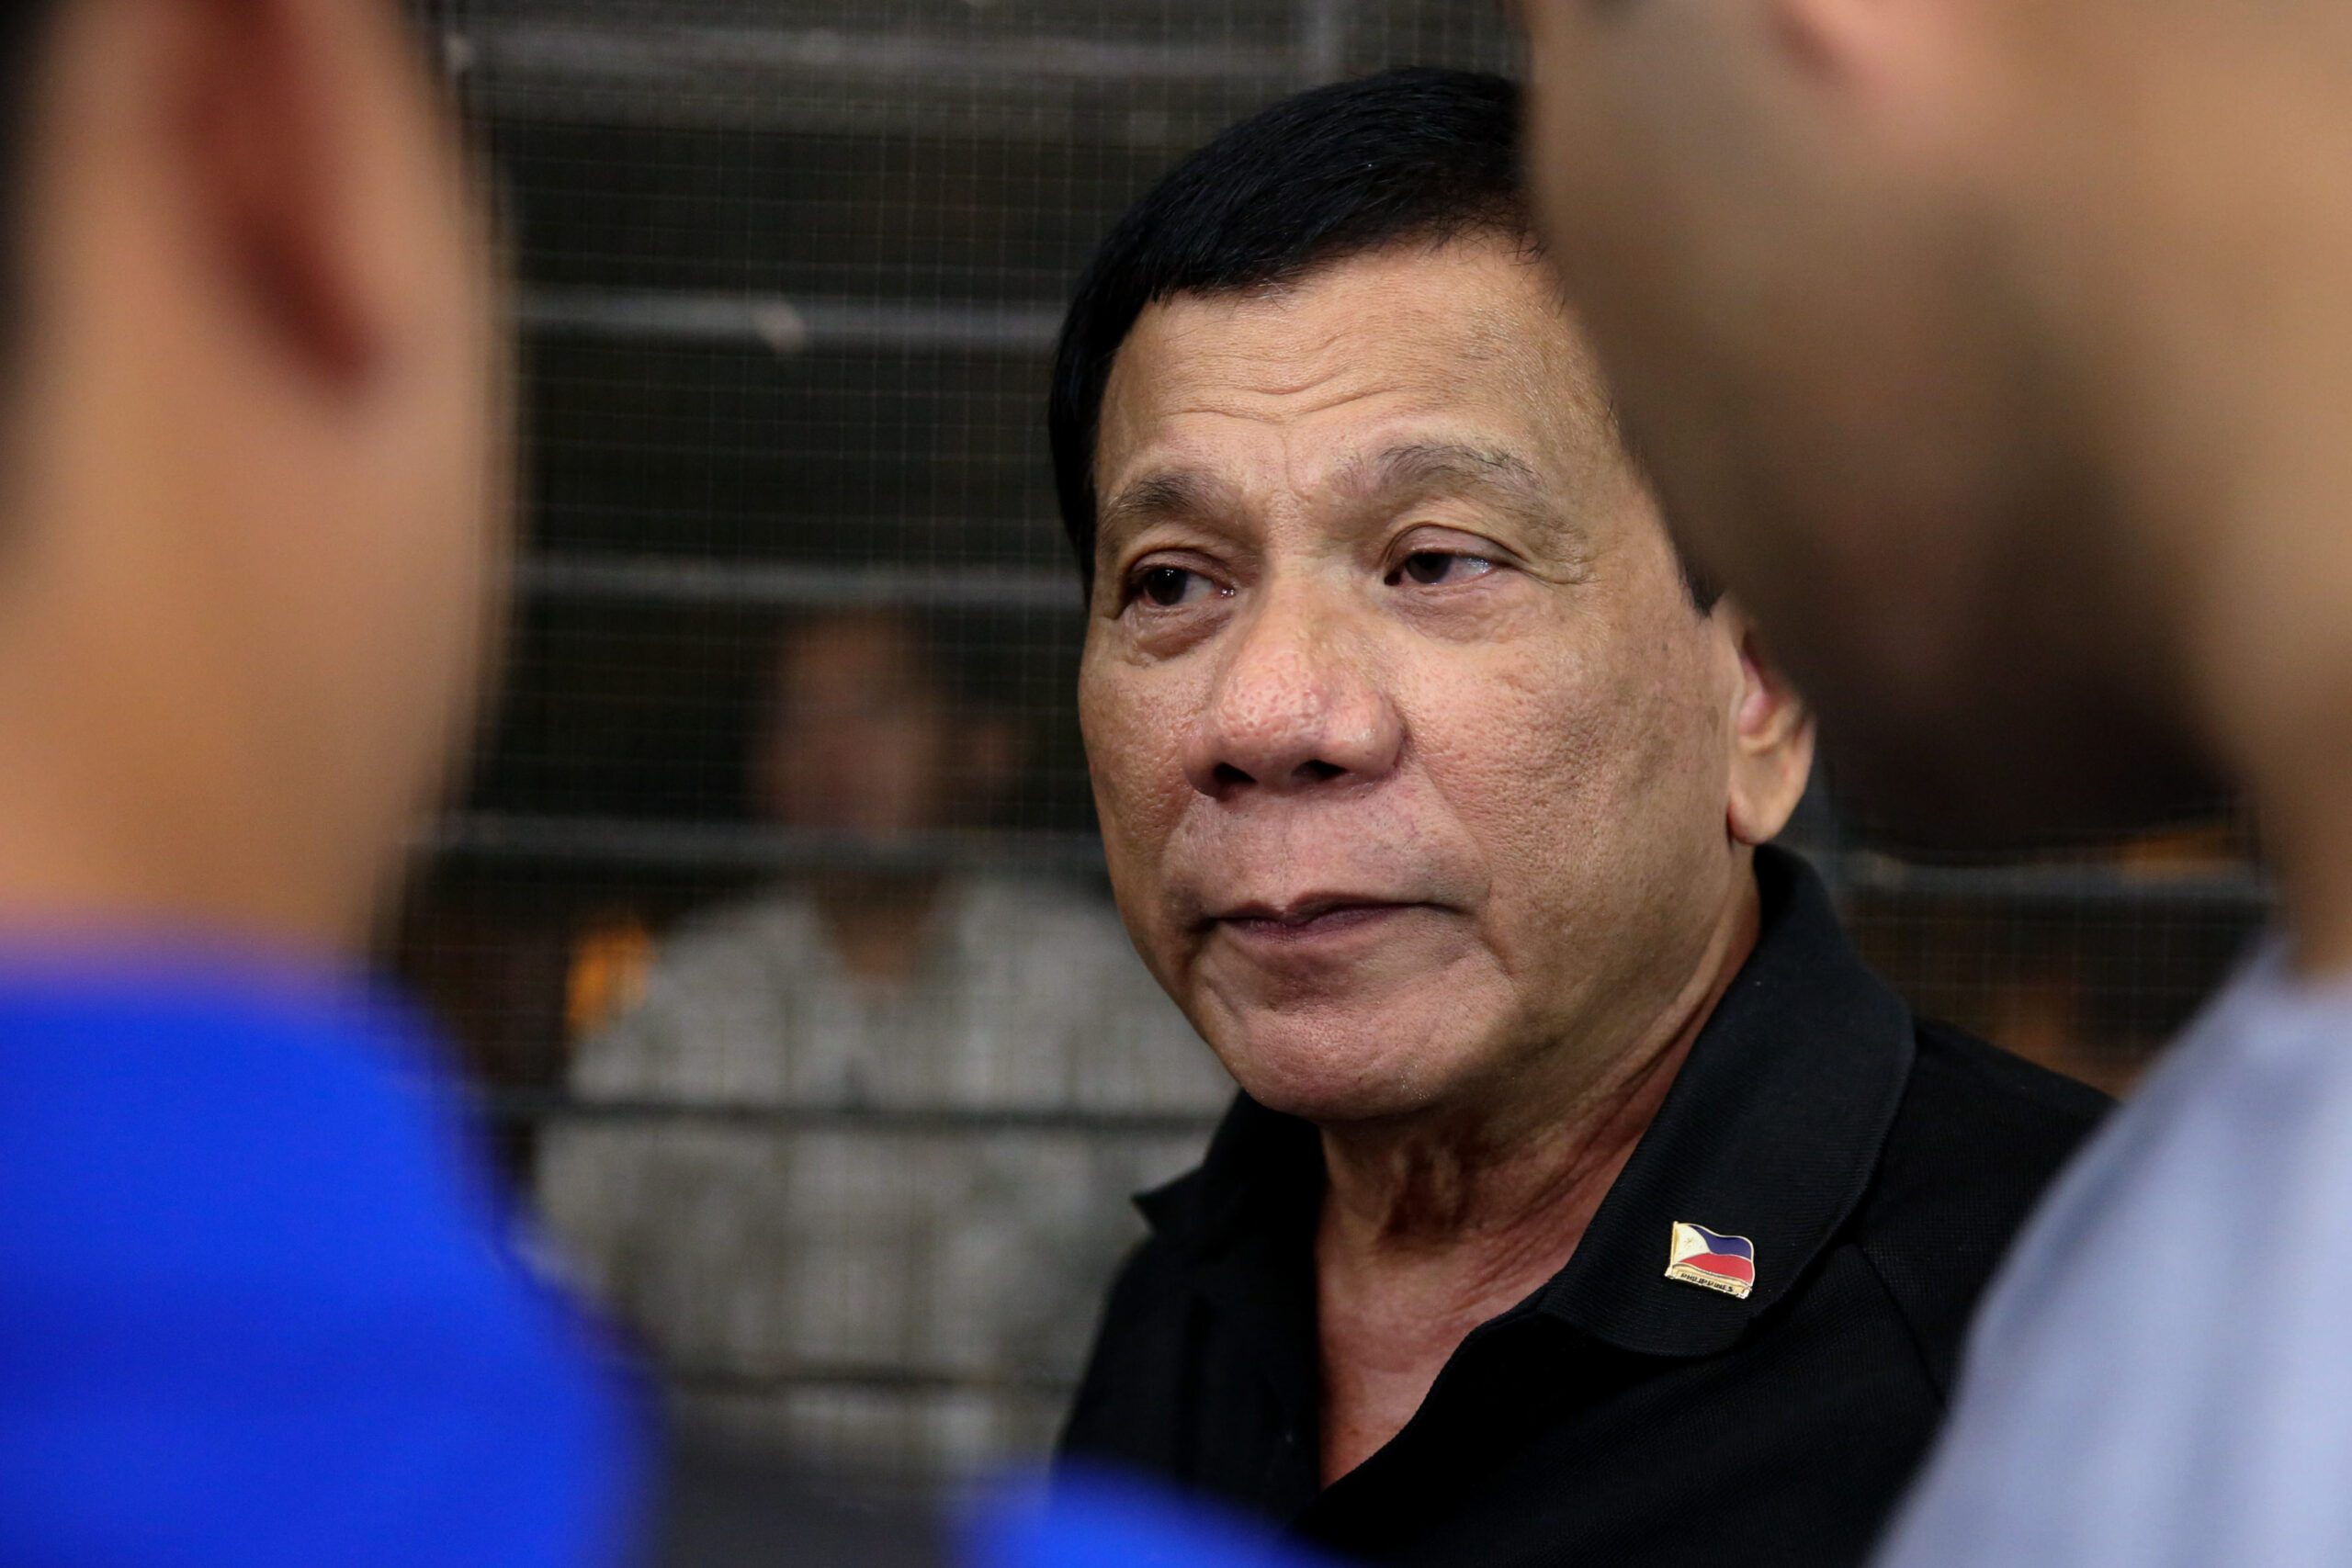 Duterte’s prolonged Davao stay for ‘rest’ and ‘meetings’